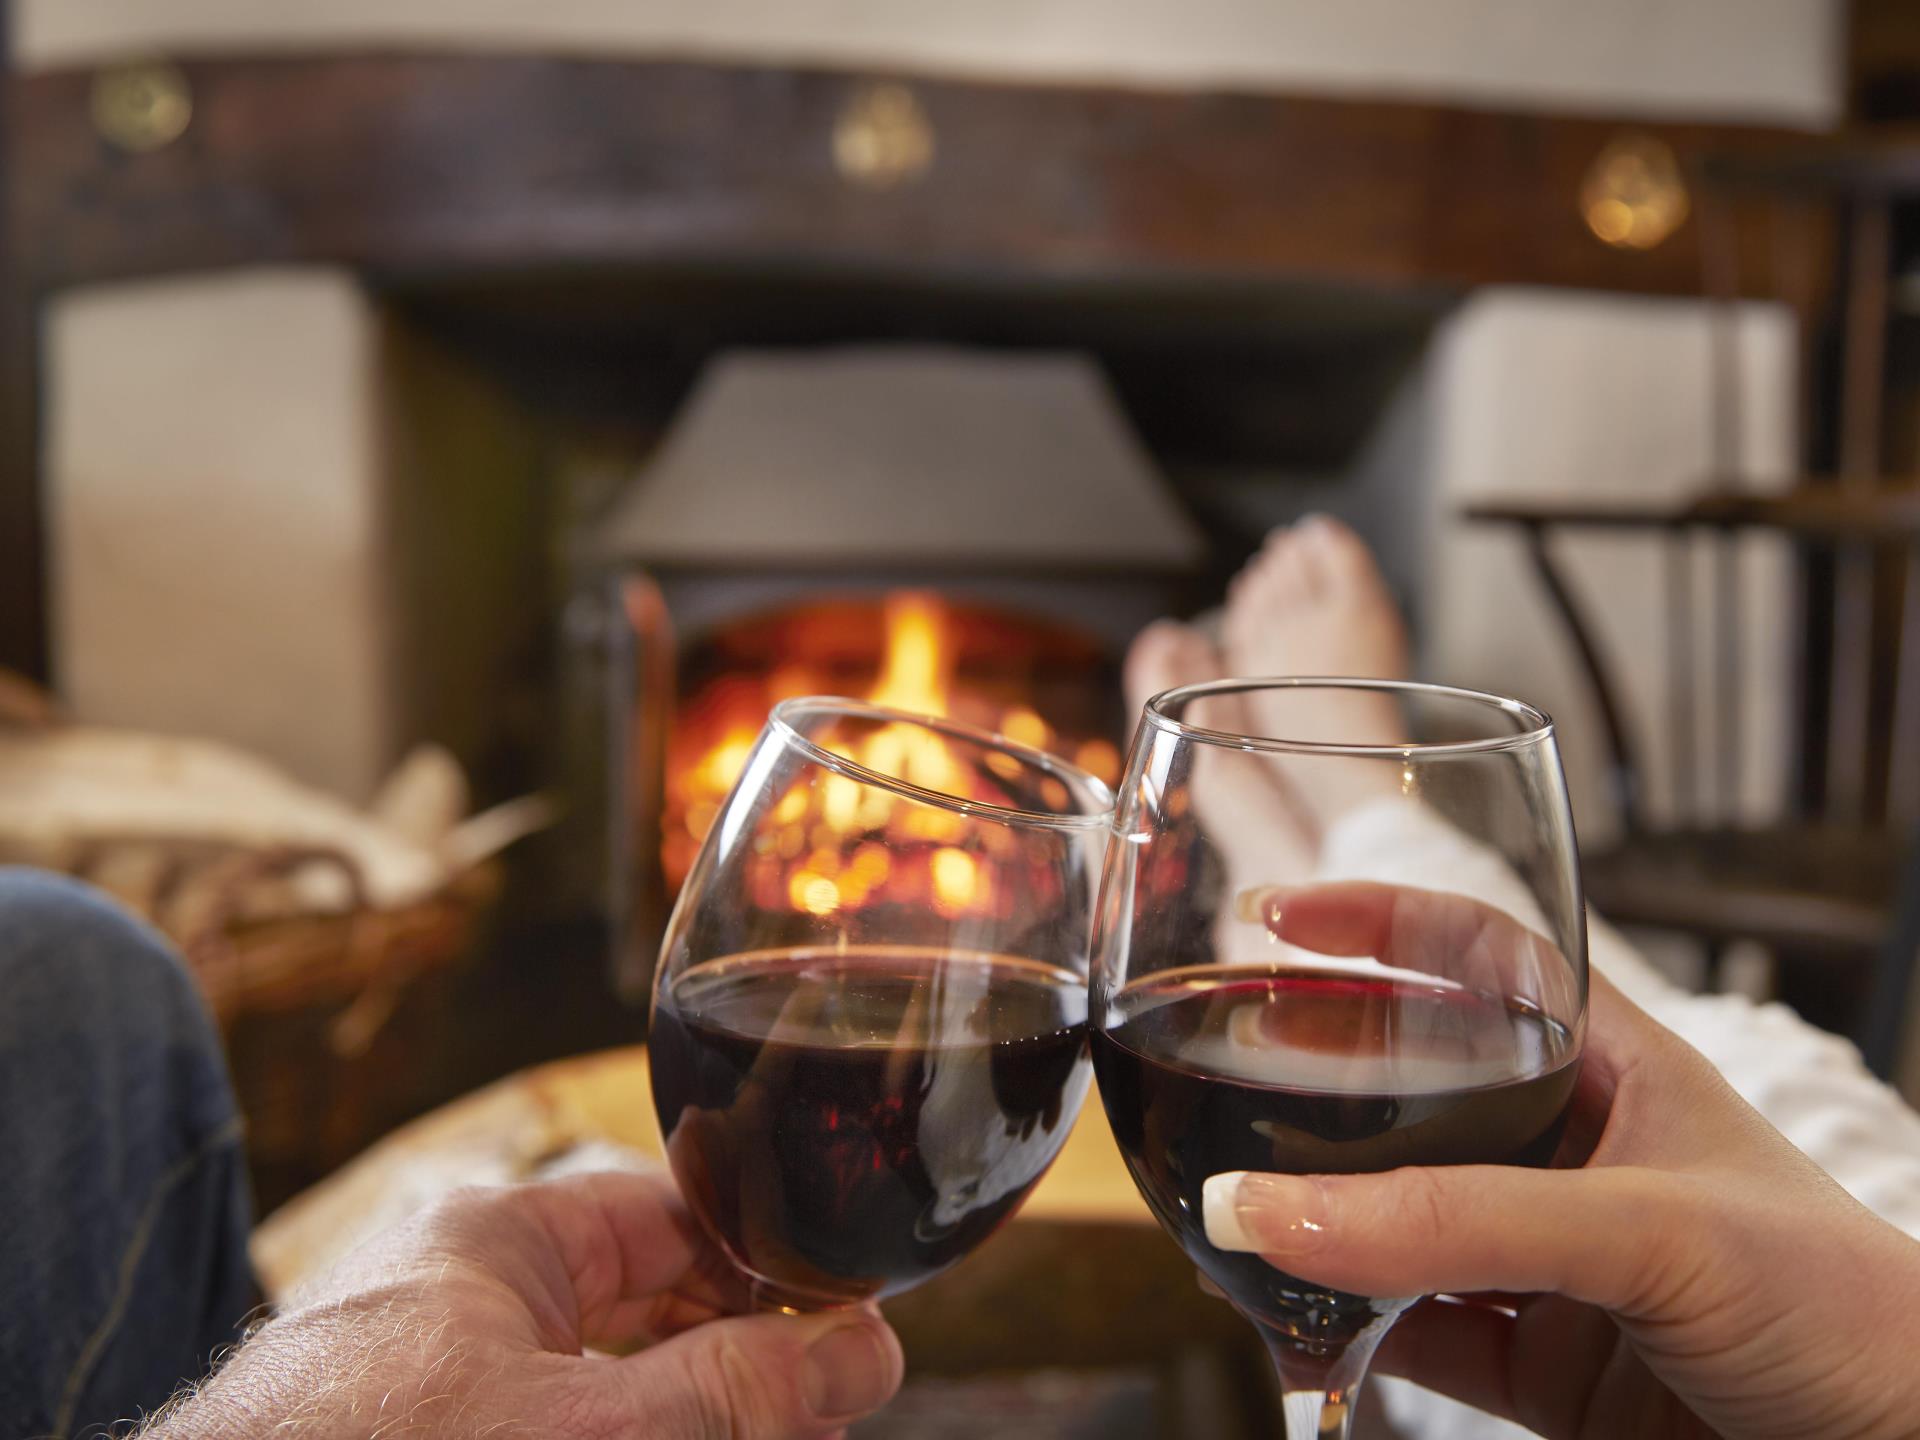 Relax by the cosy log fire